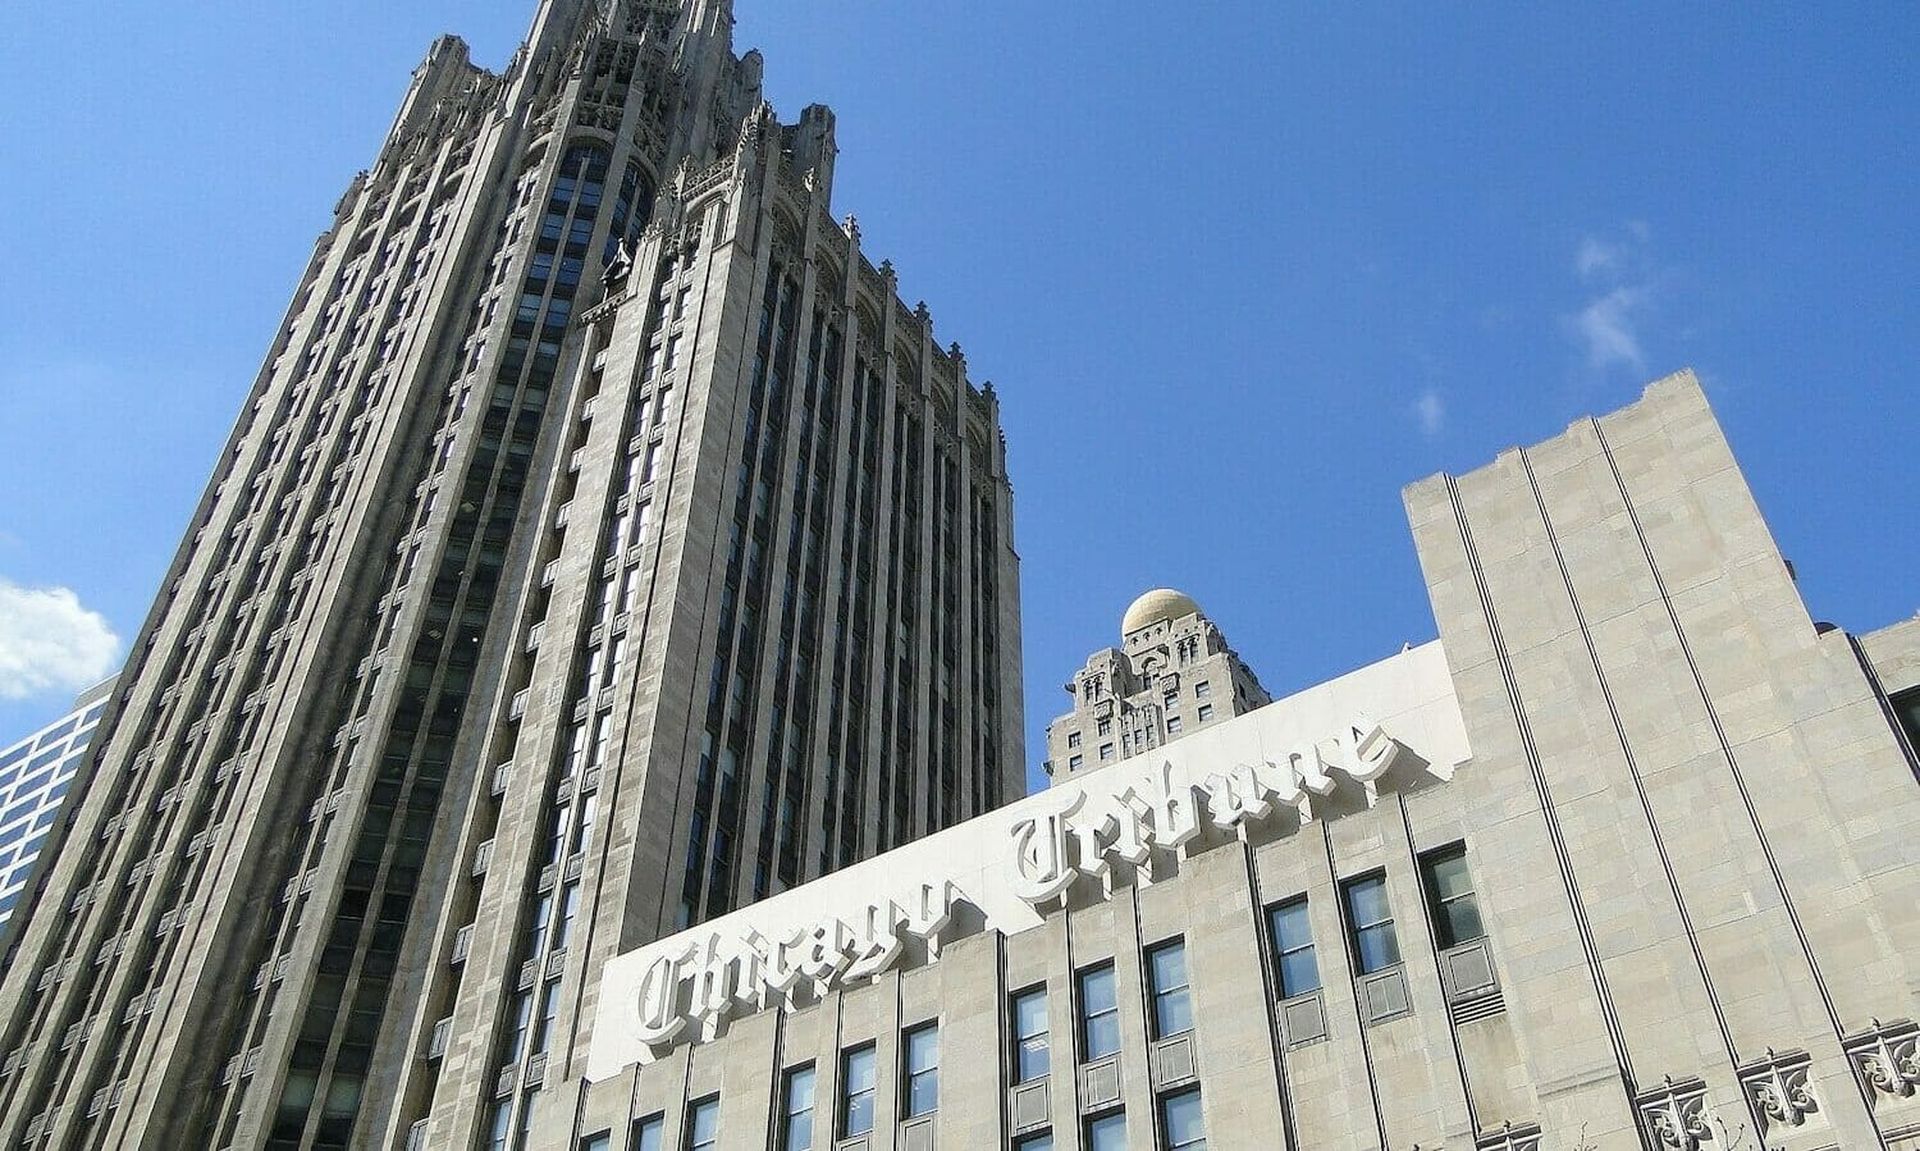 An email ent to employees of Chicago-based Tribune Publishing, parent company of the Chicago Tribune, told recipients that they would receive $5,000 to $10,000 in bonus payments, &#8220;as a direct result of the success created by the ongoing efforts to cut our costs.&#8221; (Adam Jones, Ph.D. via Creative Commons Attribution-Share Alike 3.0 Unport...